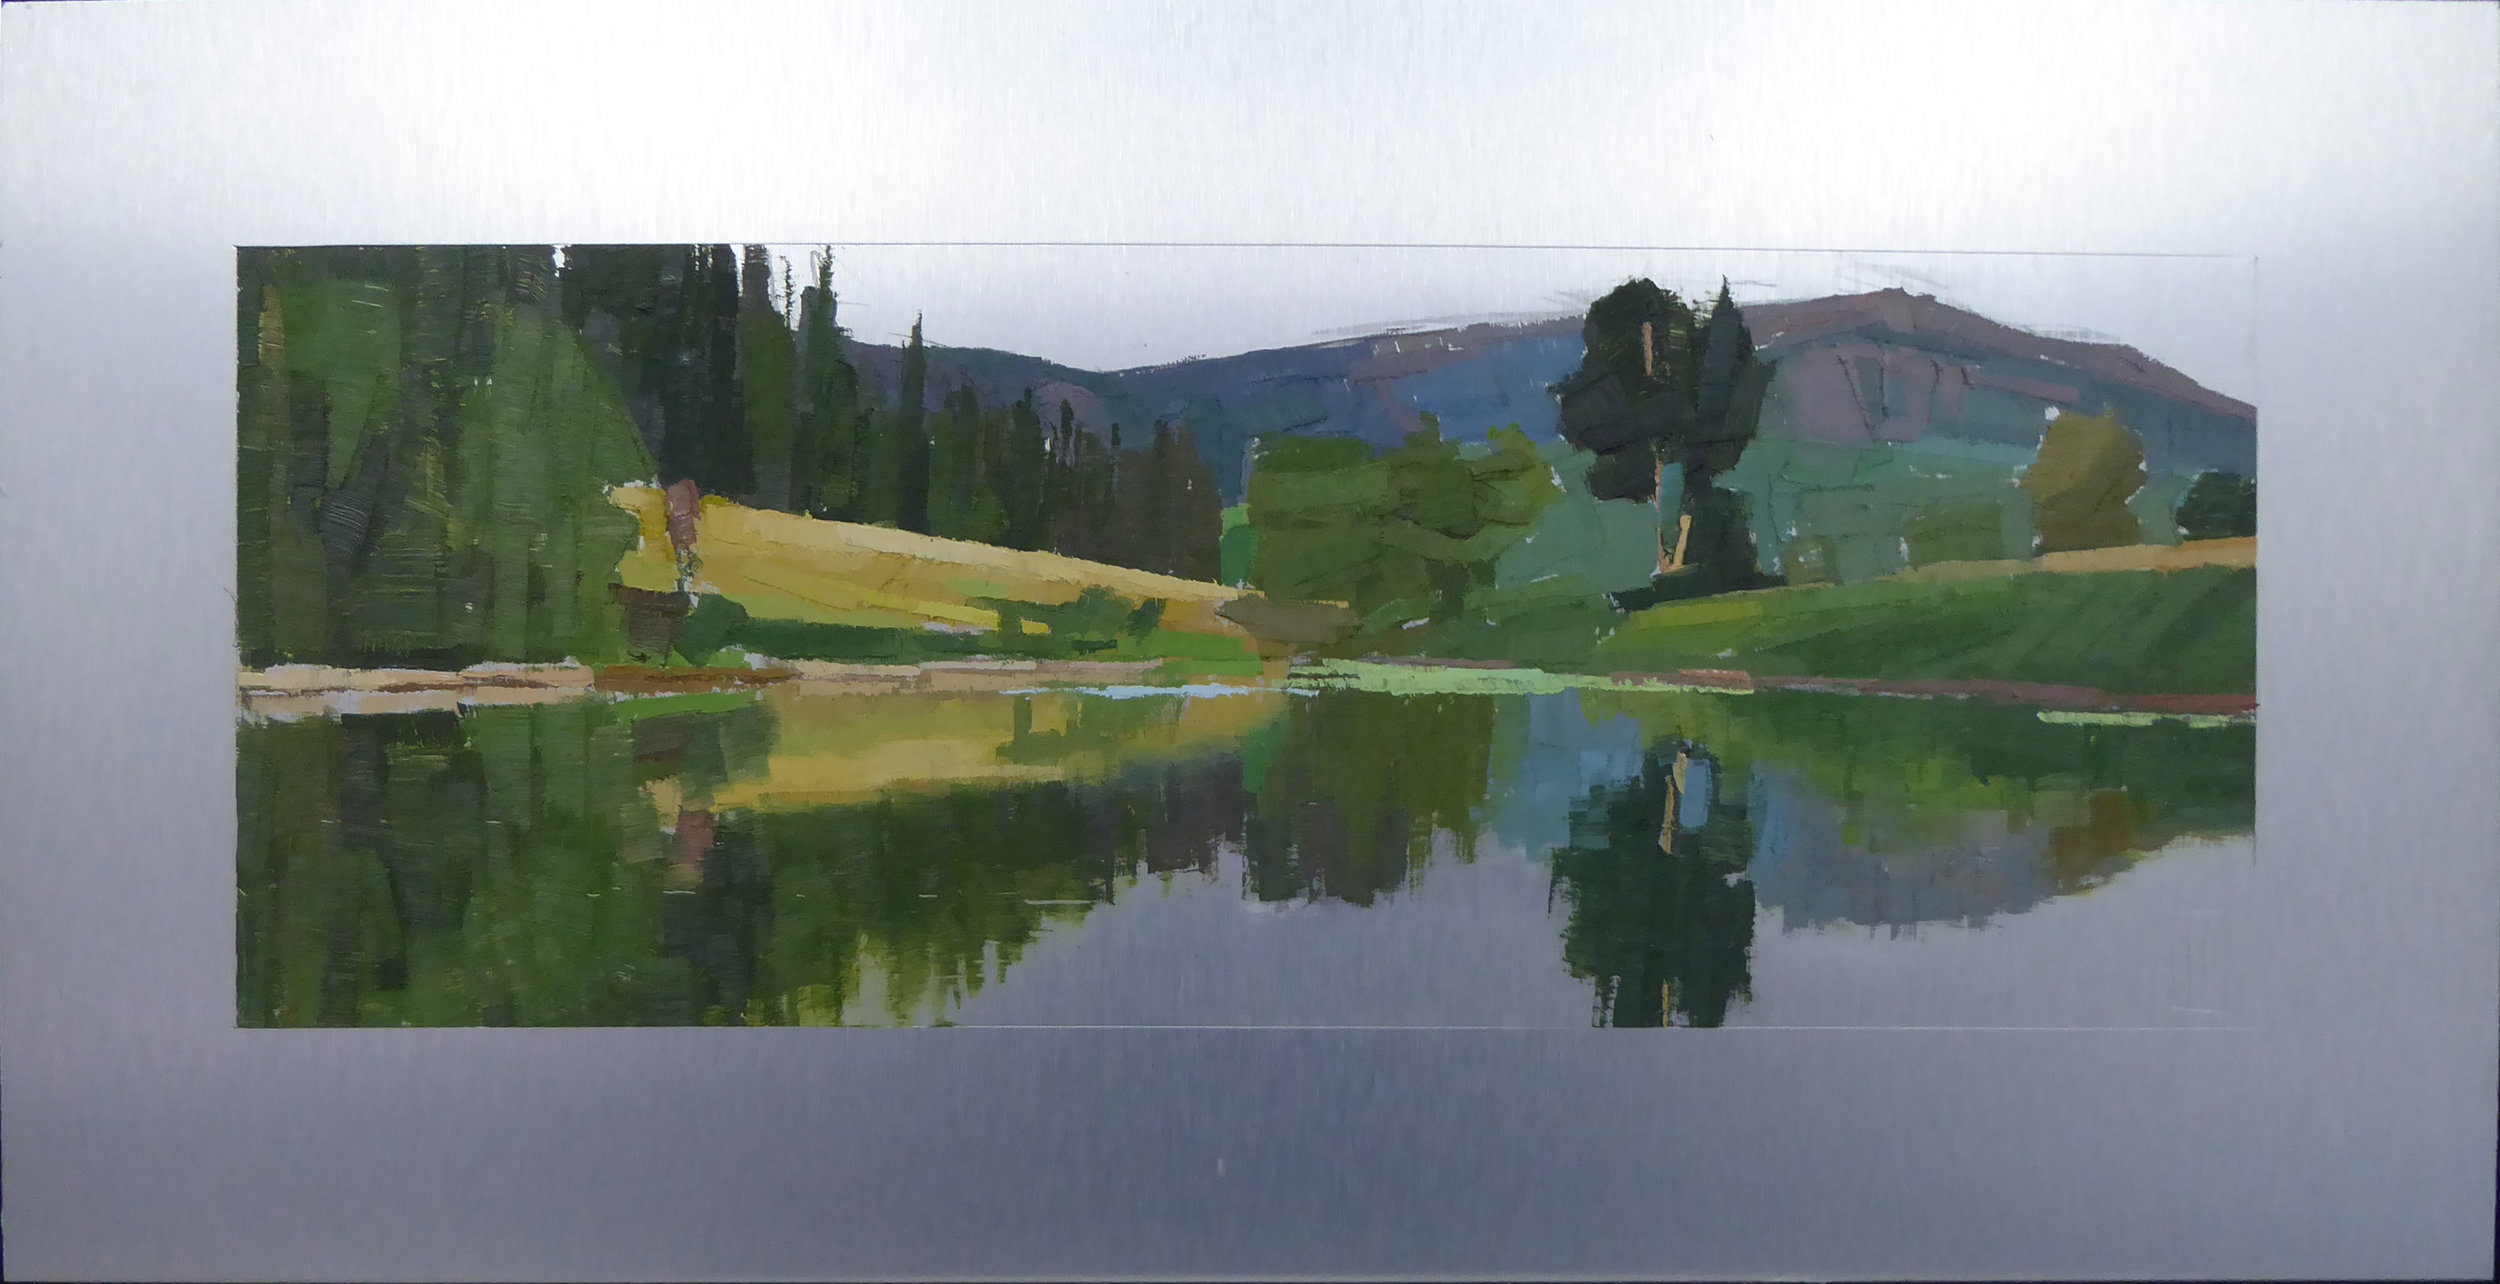   Long Pond Shining  6 x 16 painting  oil on 10 x 20 aluminum panel   Islesford Artists  